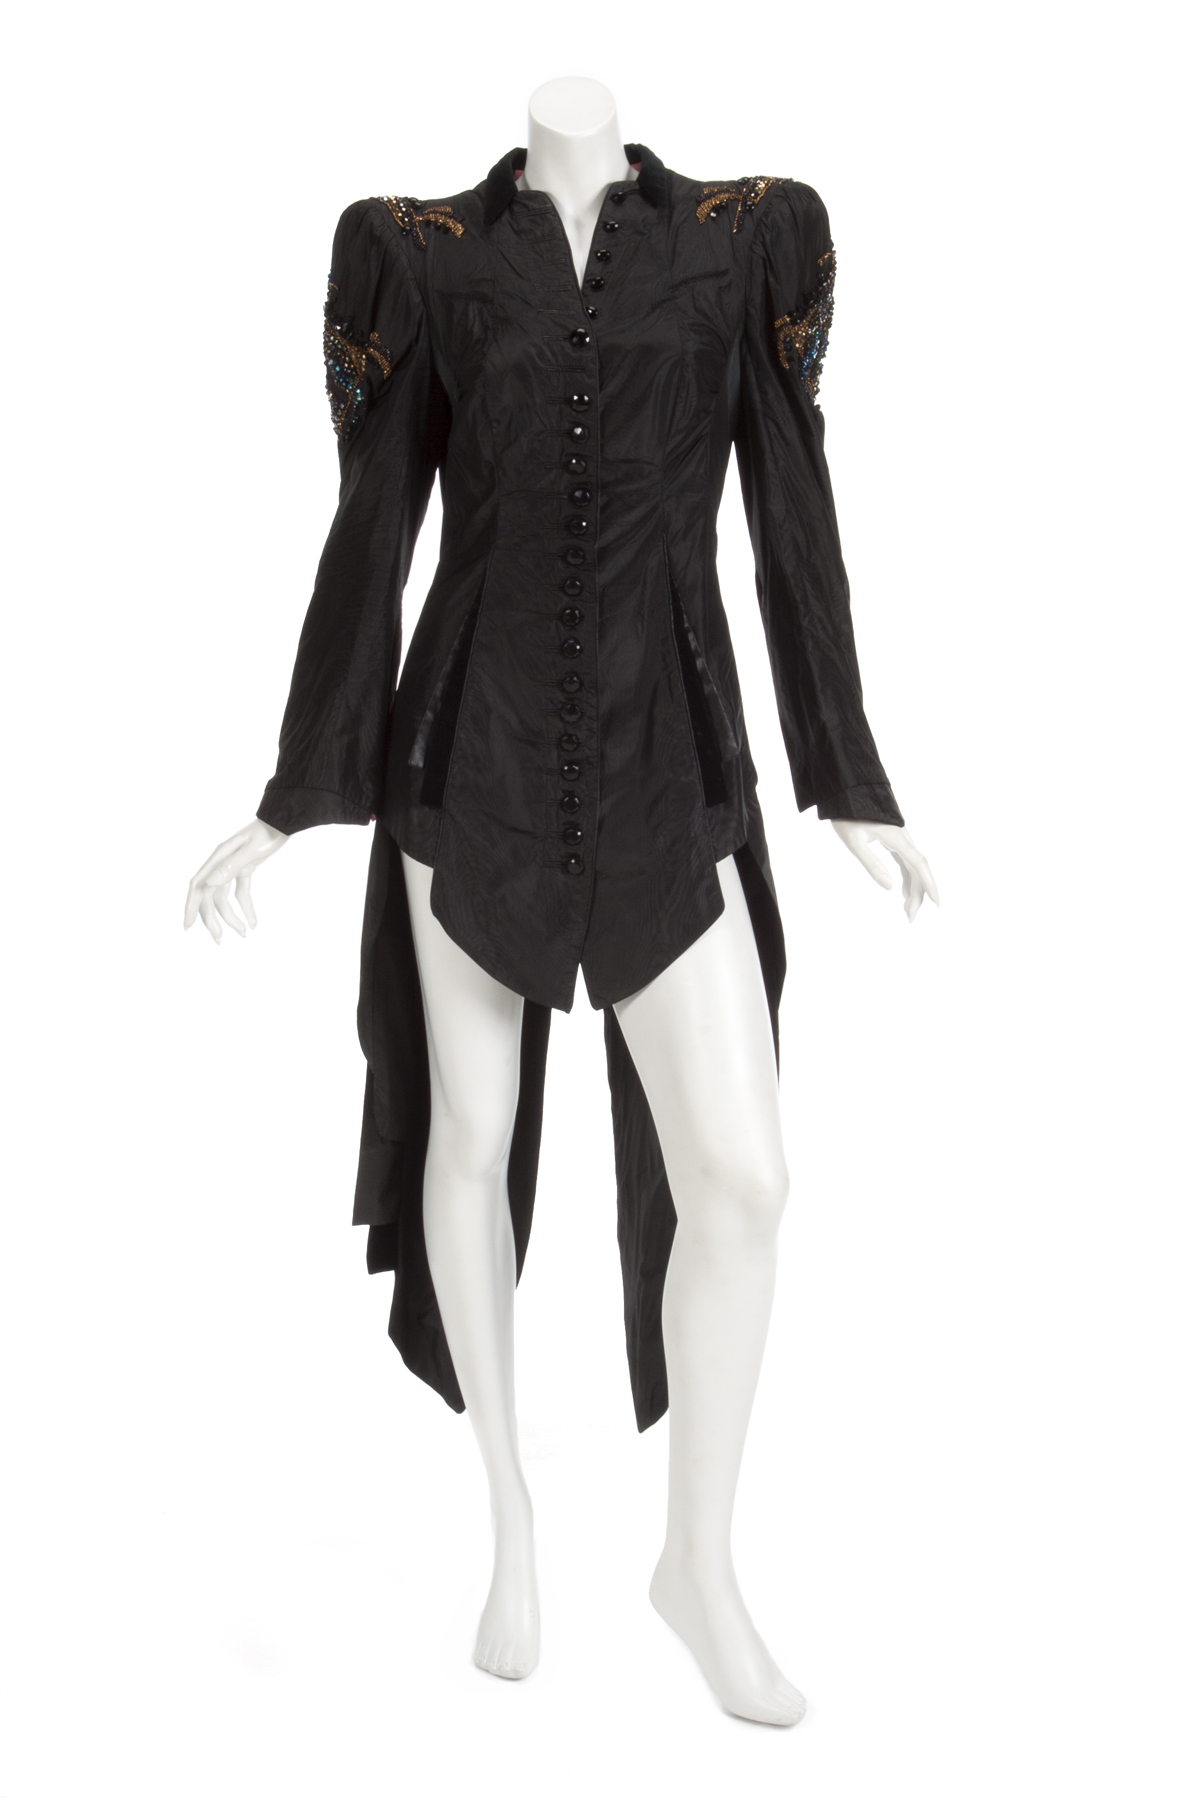 ANN WILSON STAGE JACKET A black silk moire custom made jacket stage worn by Ann Wilson. The fitted